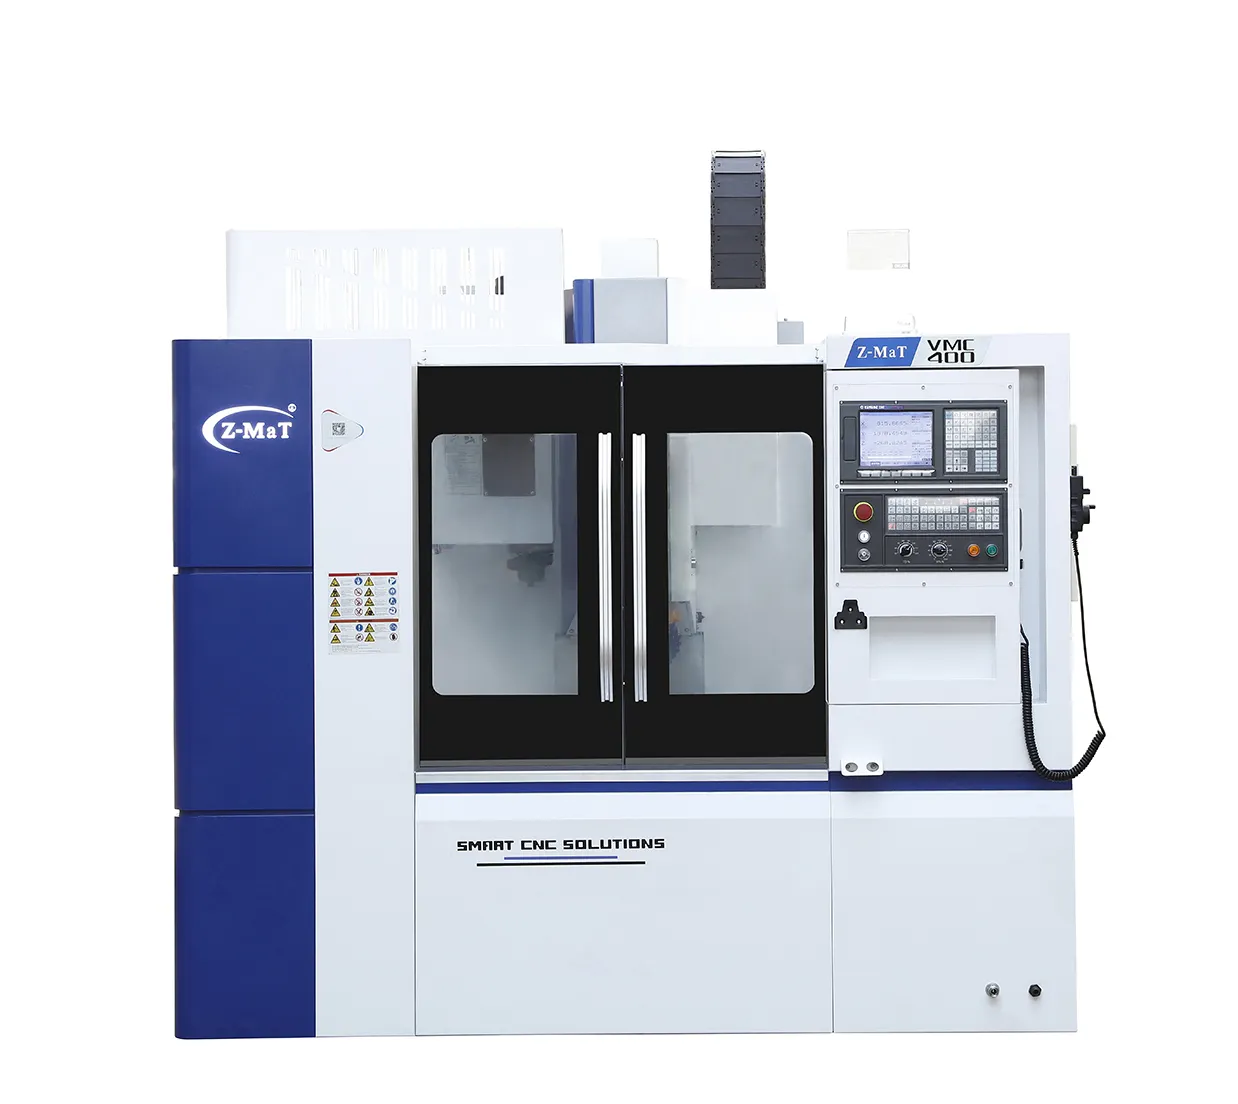 VMC400 mini 3 axis/5 axis cnc milling machine with siemens and fanuc system